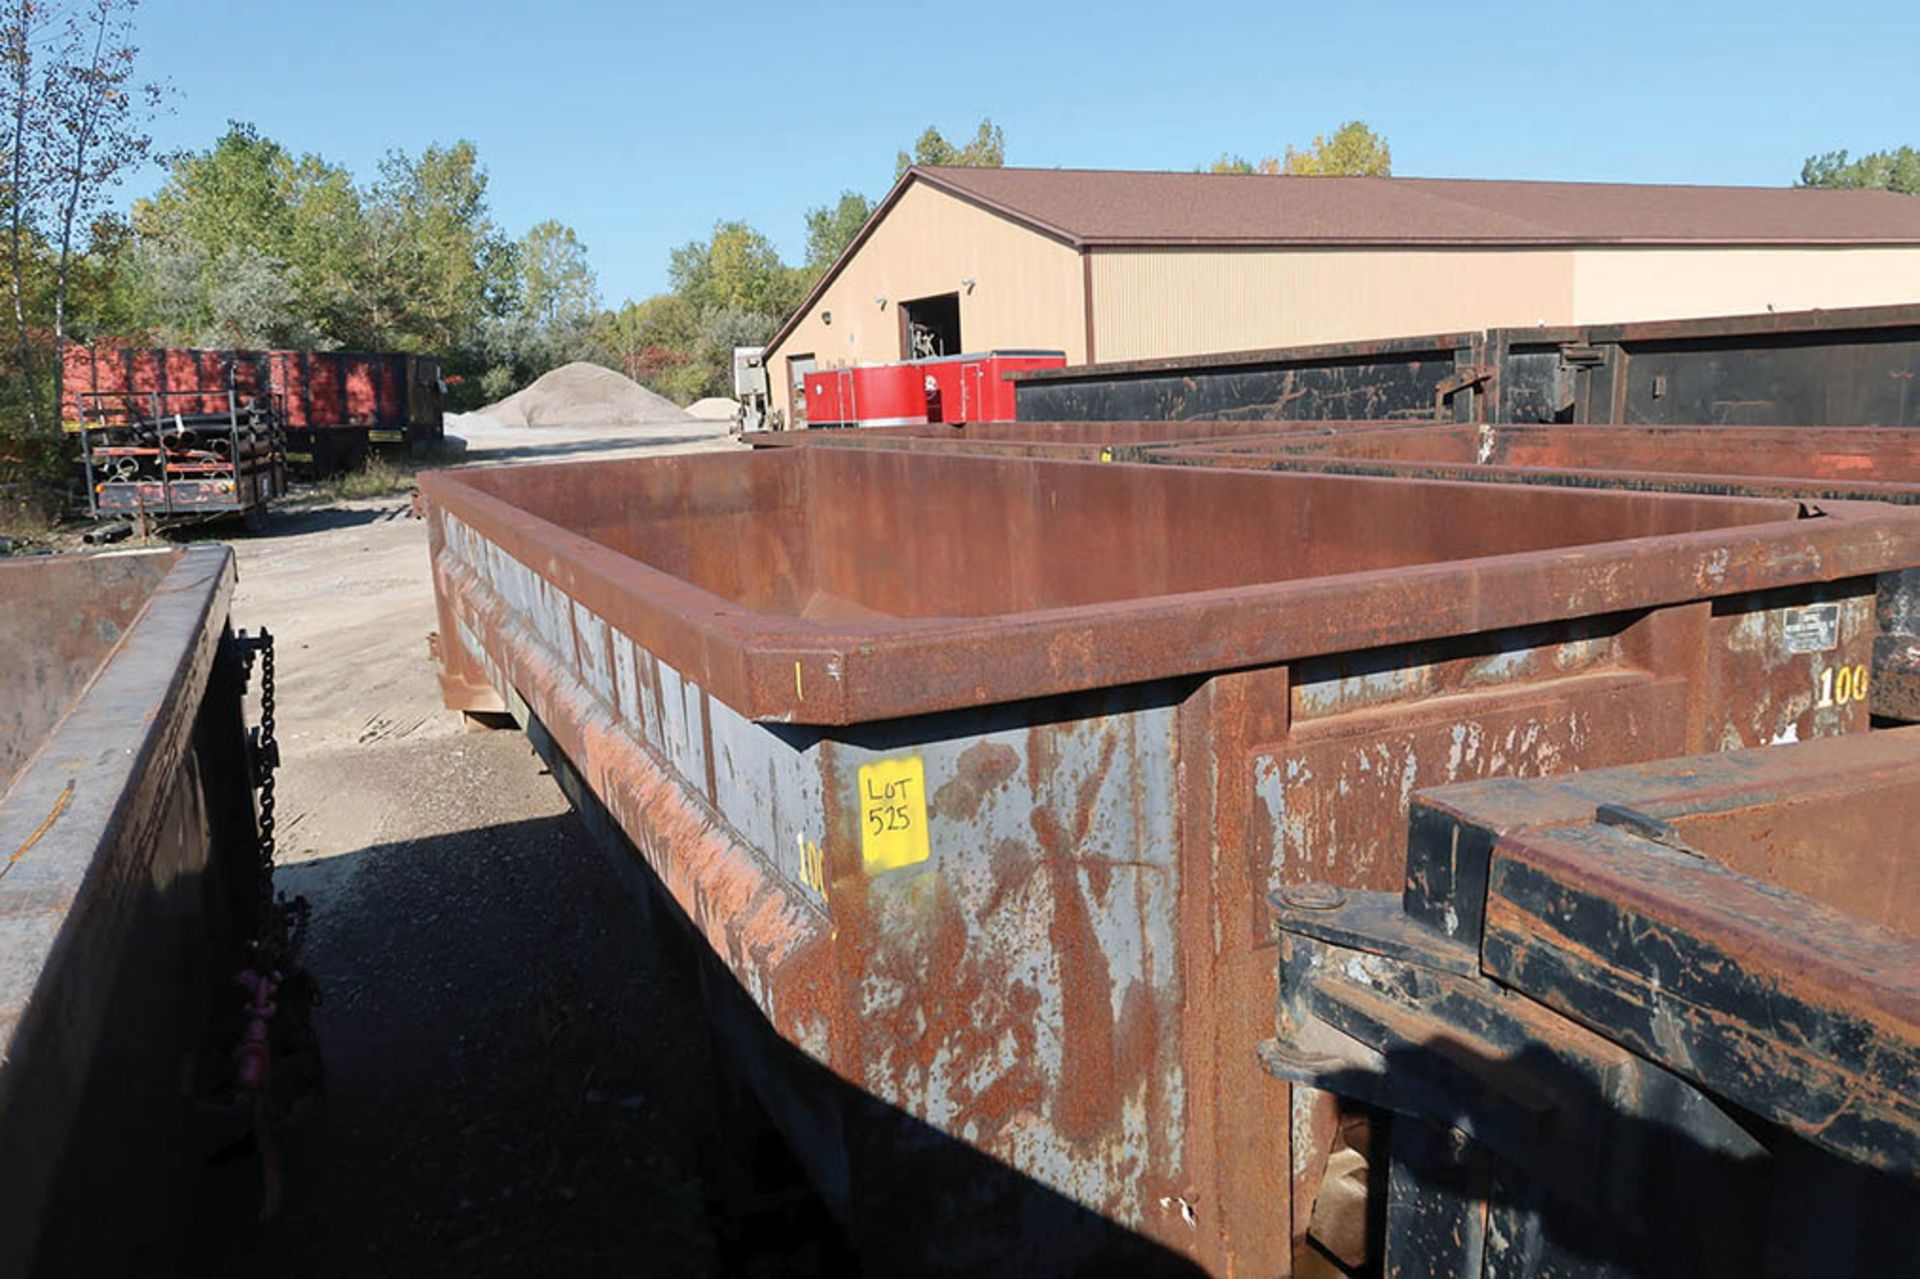 30 CU. YARD ROLL-OFF CONTAINER, RB100 ***LOCATED IN MIDLAND, MICHIGAN**